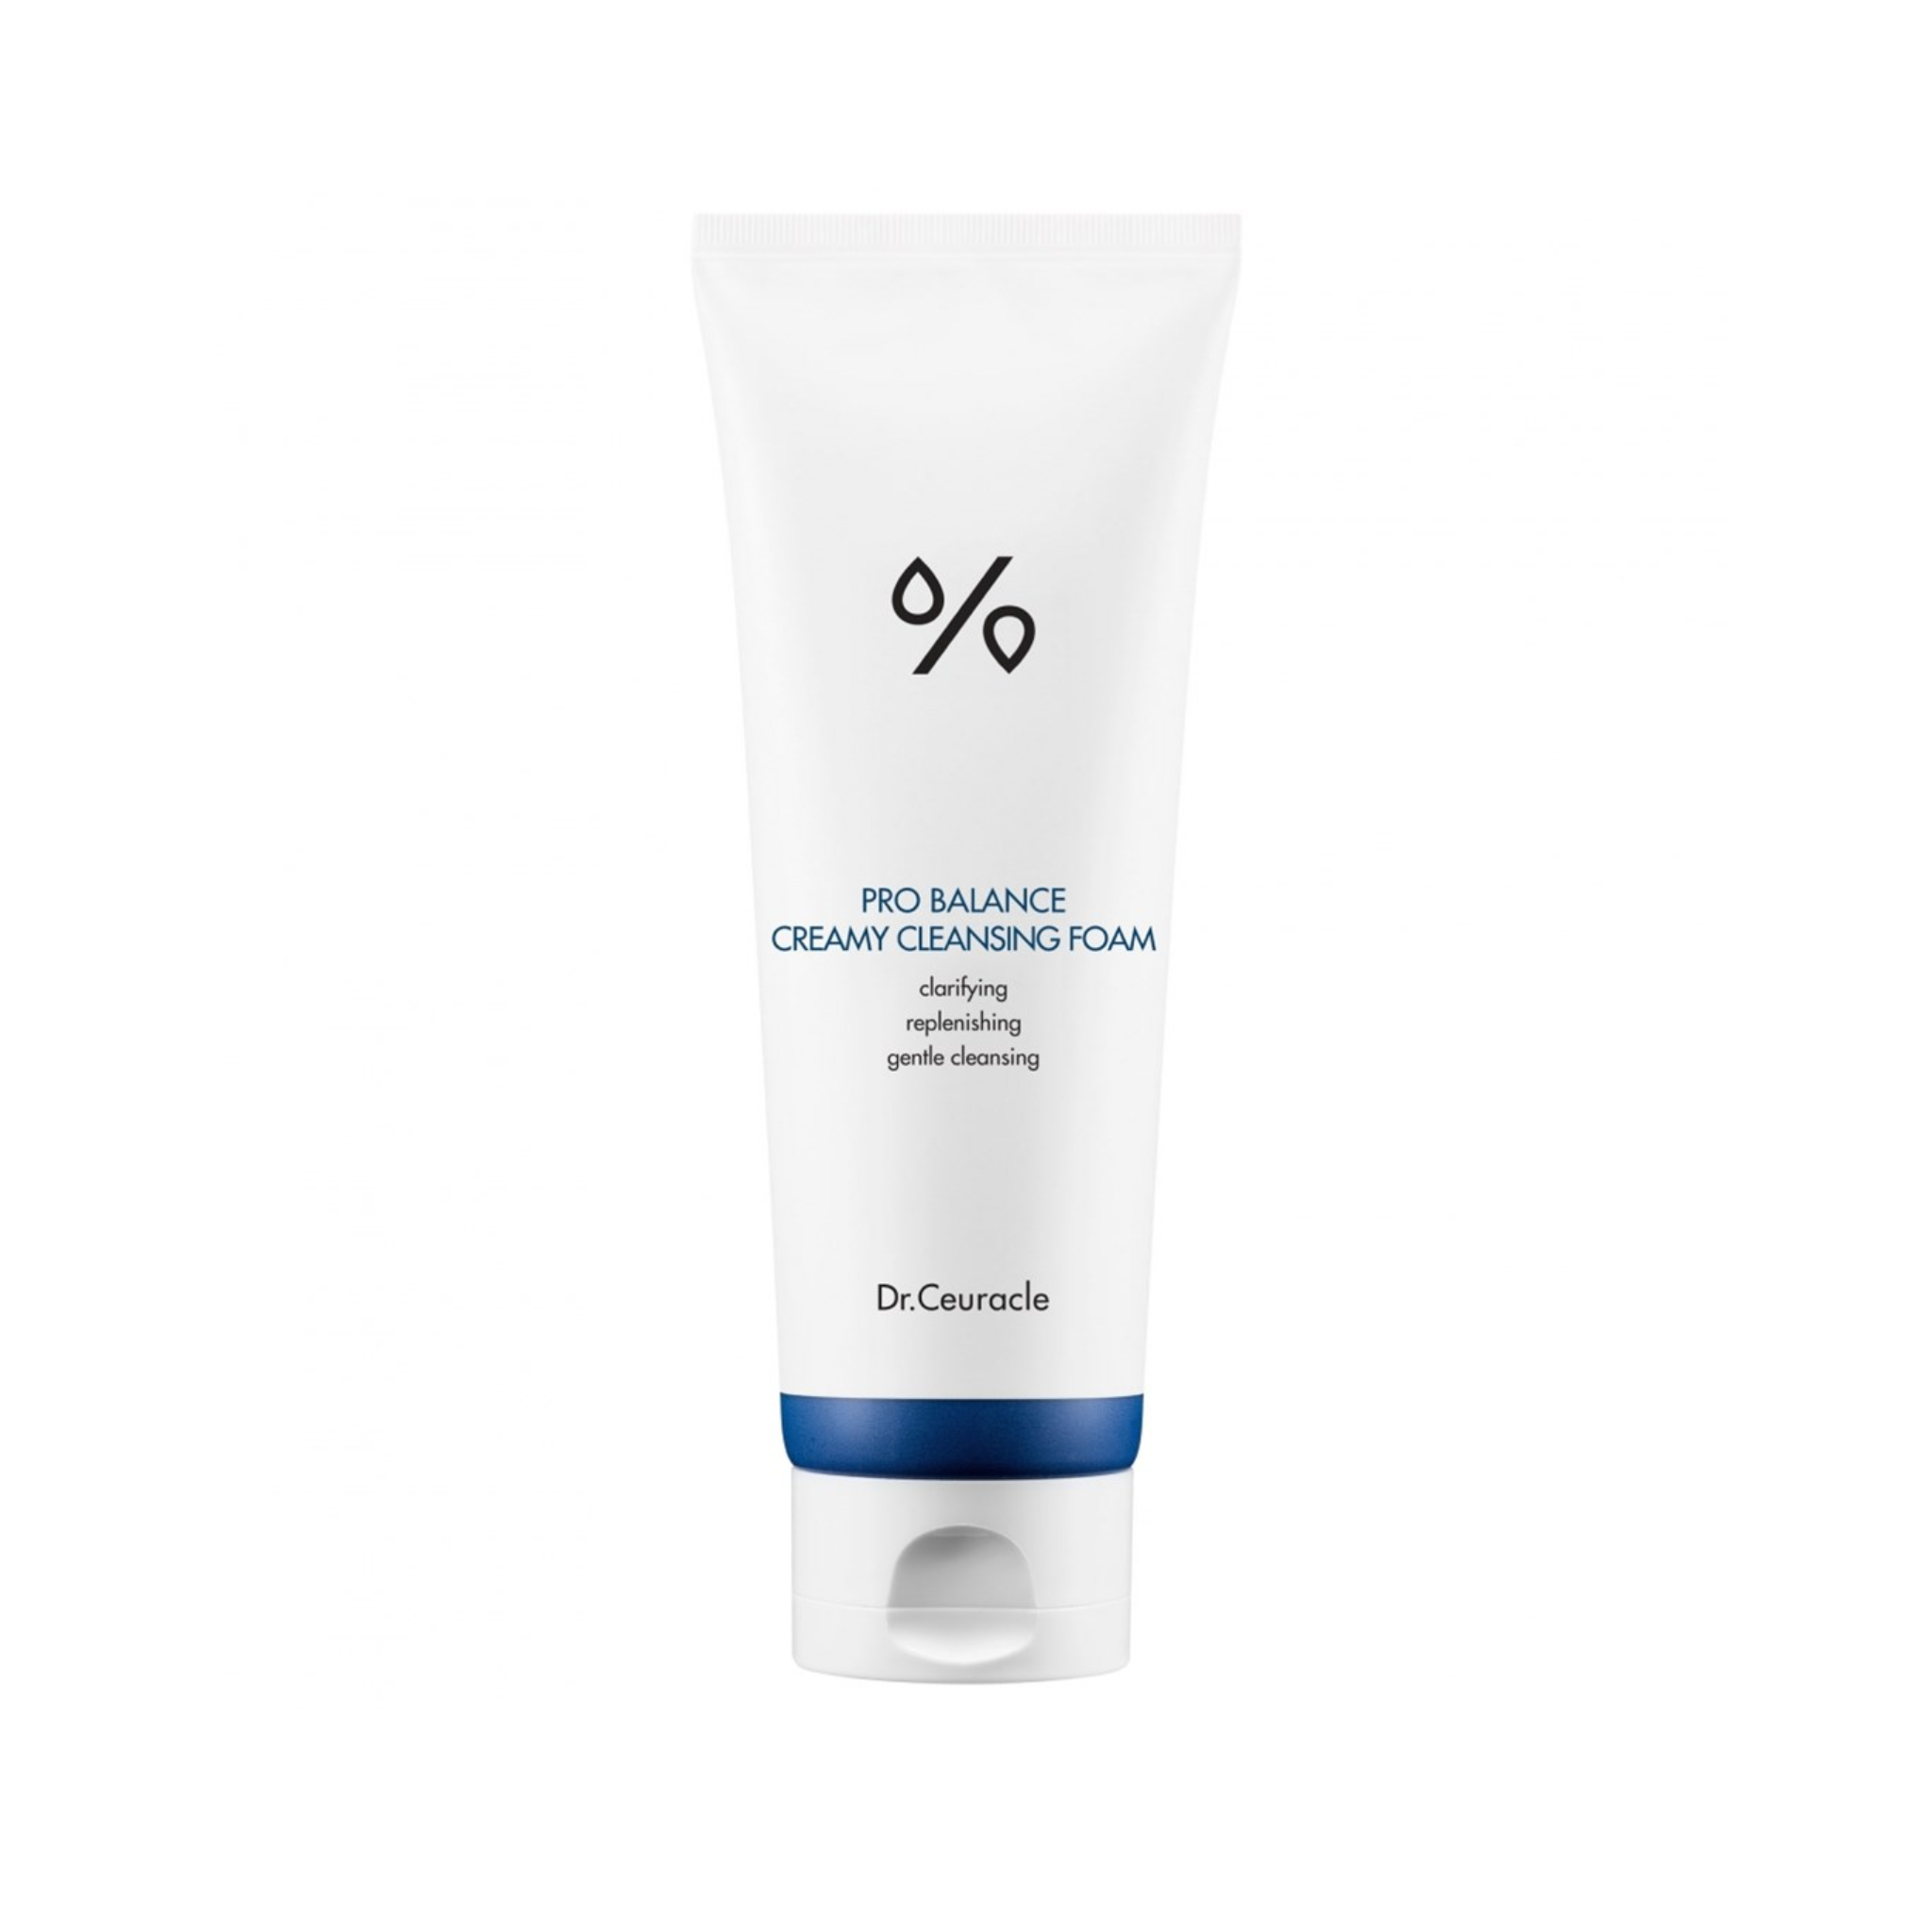 DR CEURACLE Pro Balance Creamy Cleansing Foam (150ml)